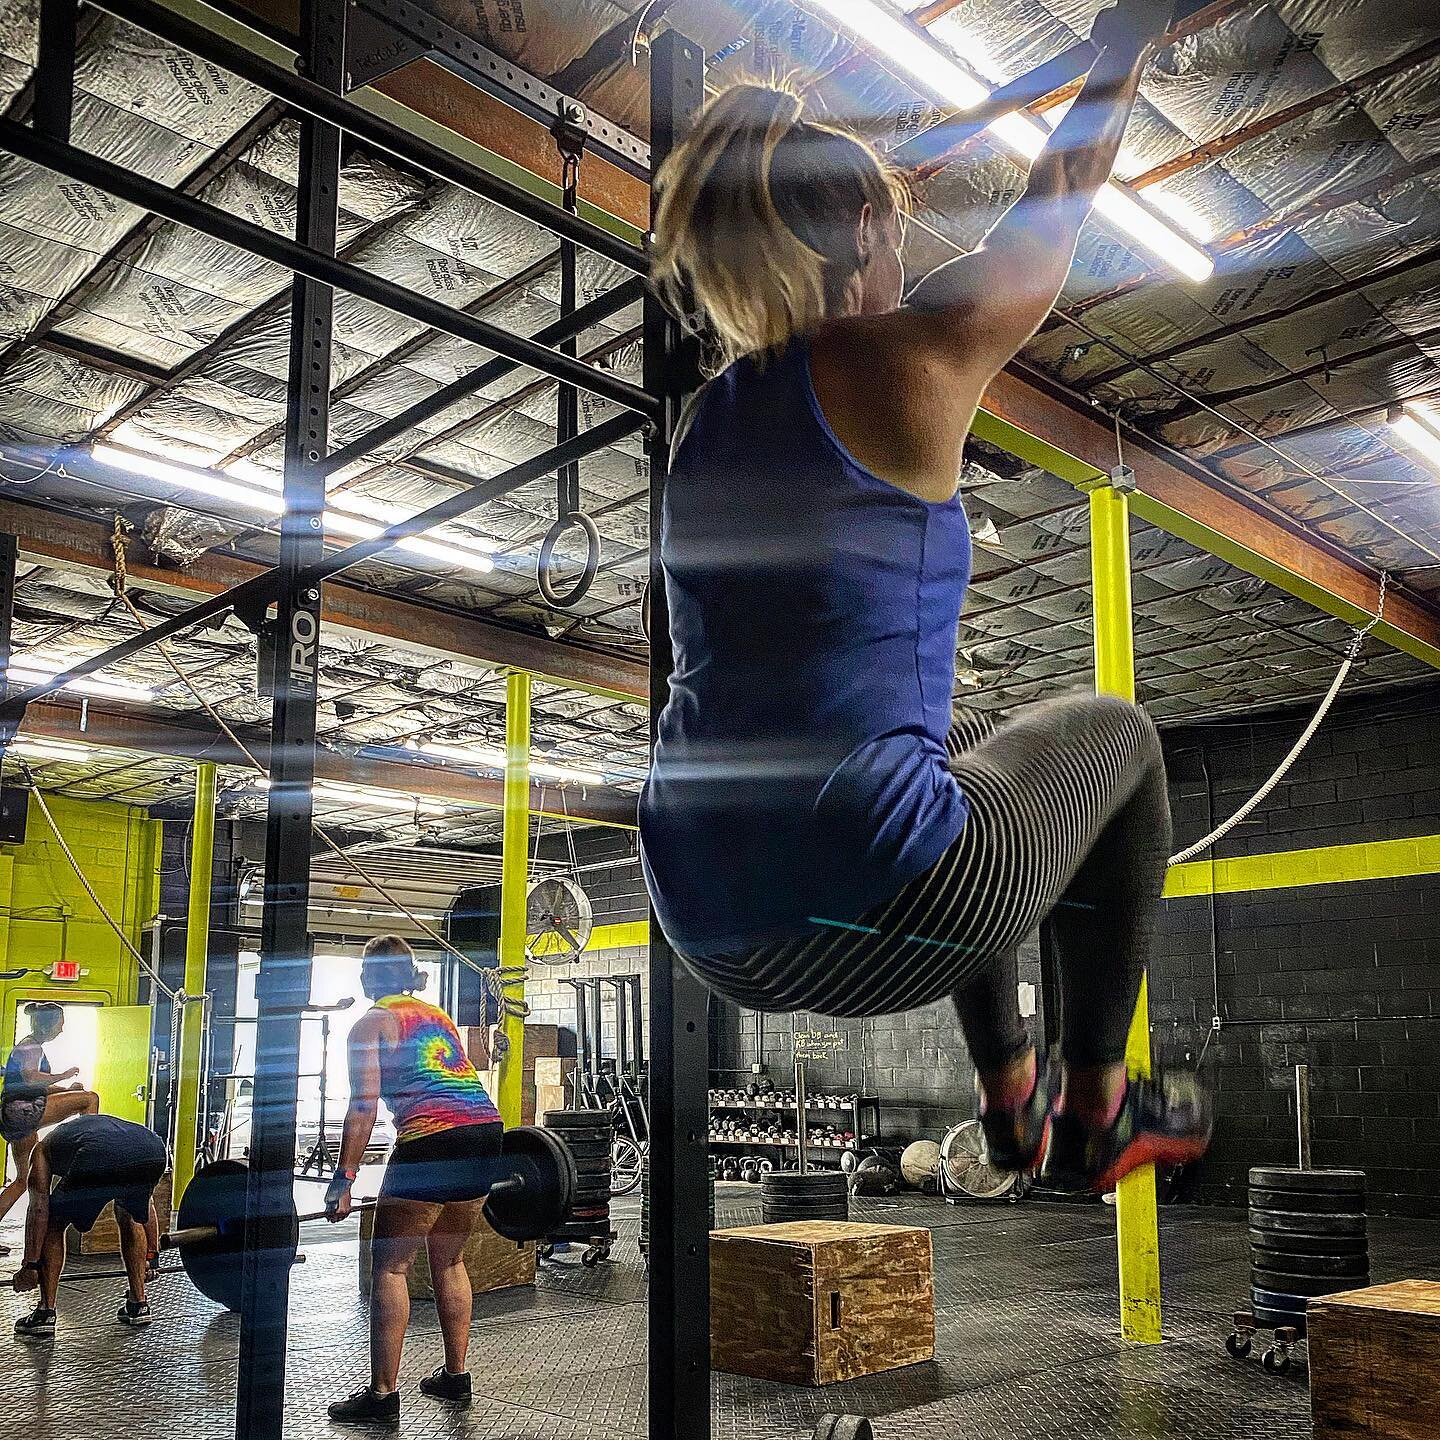 SUNDAY SCHEDULE 
11-1 Open Gym
1pm WOD
📦 246 Park St
📱 740-525-5967
💻 crossfitincognito.com